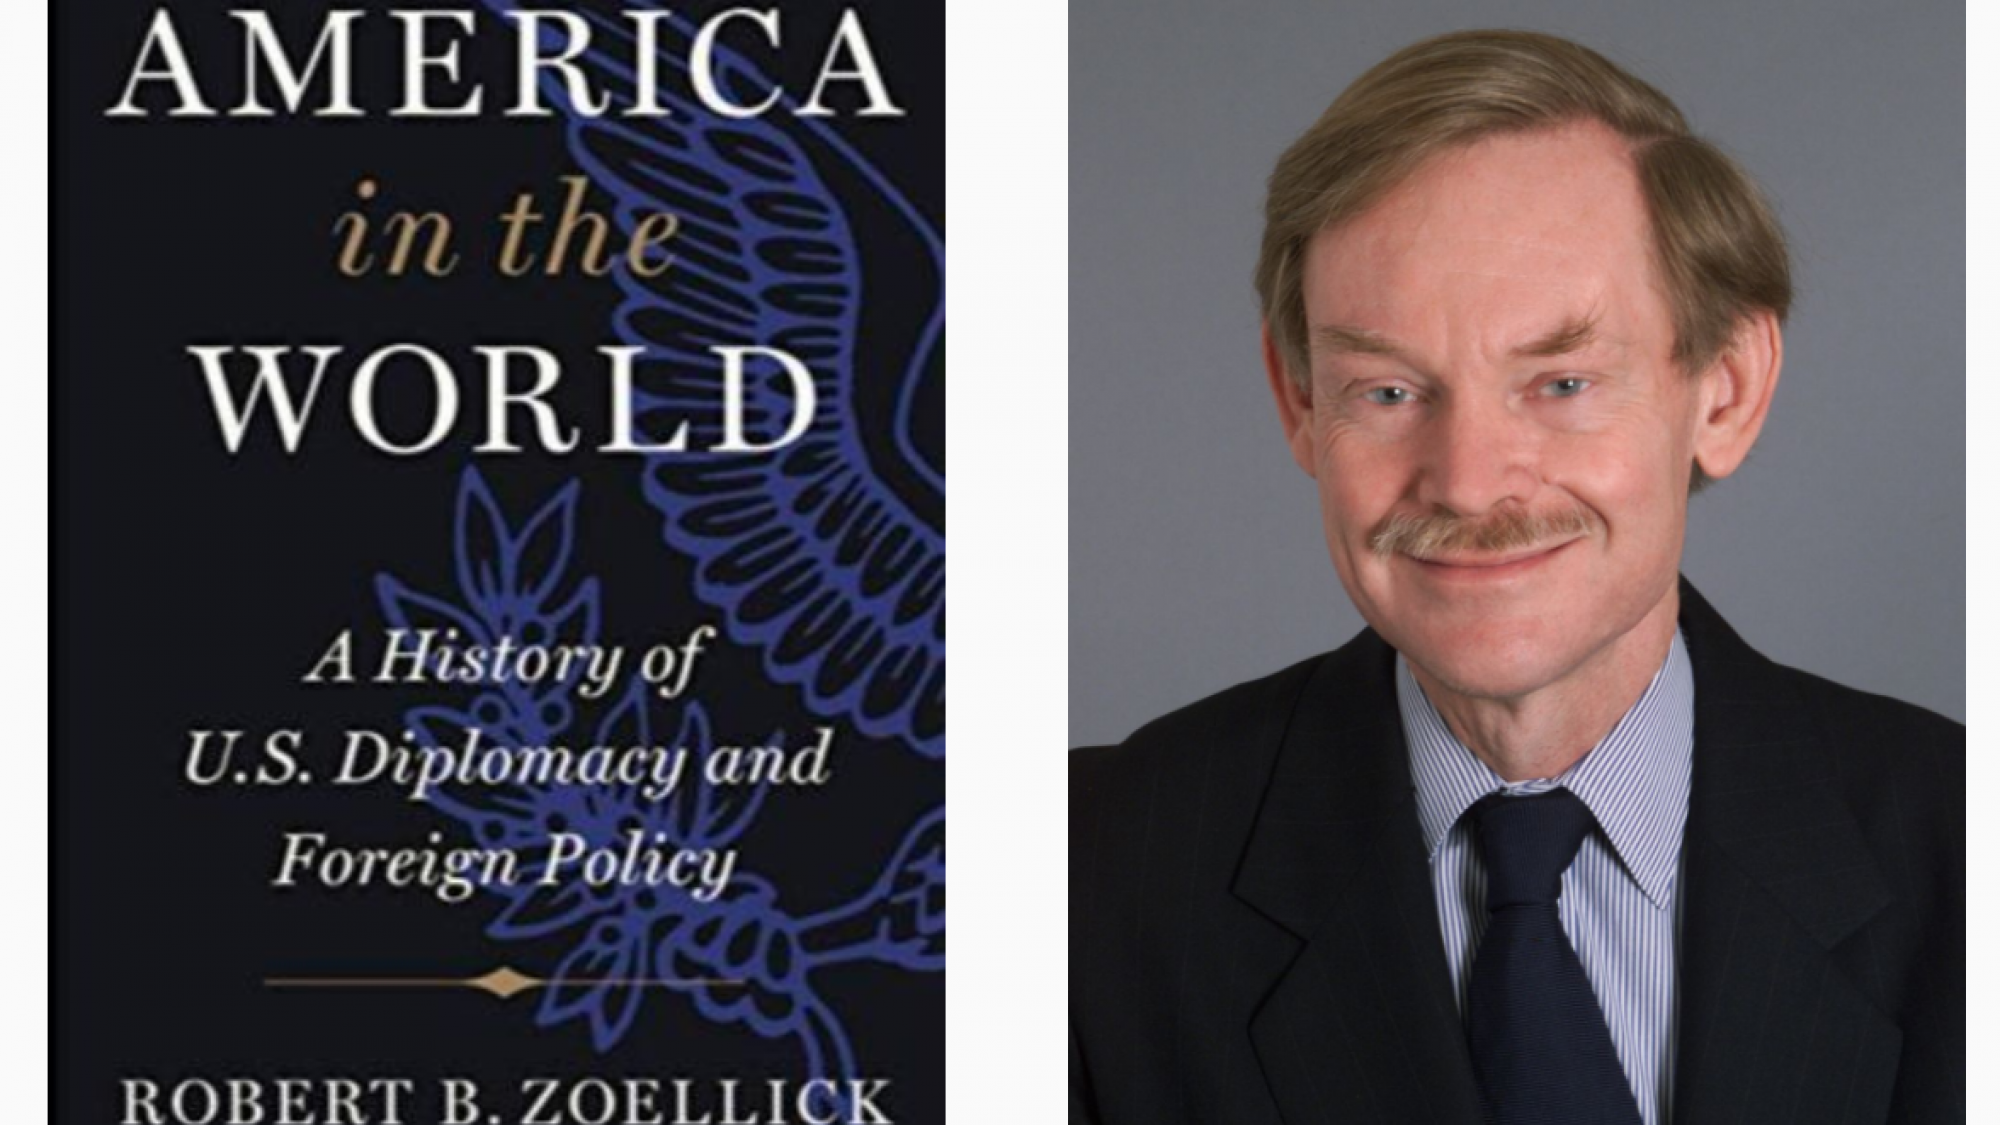 America in the World by Robert B. Zoellick